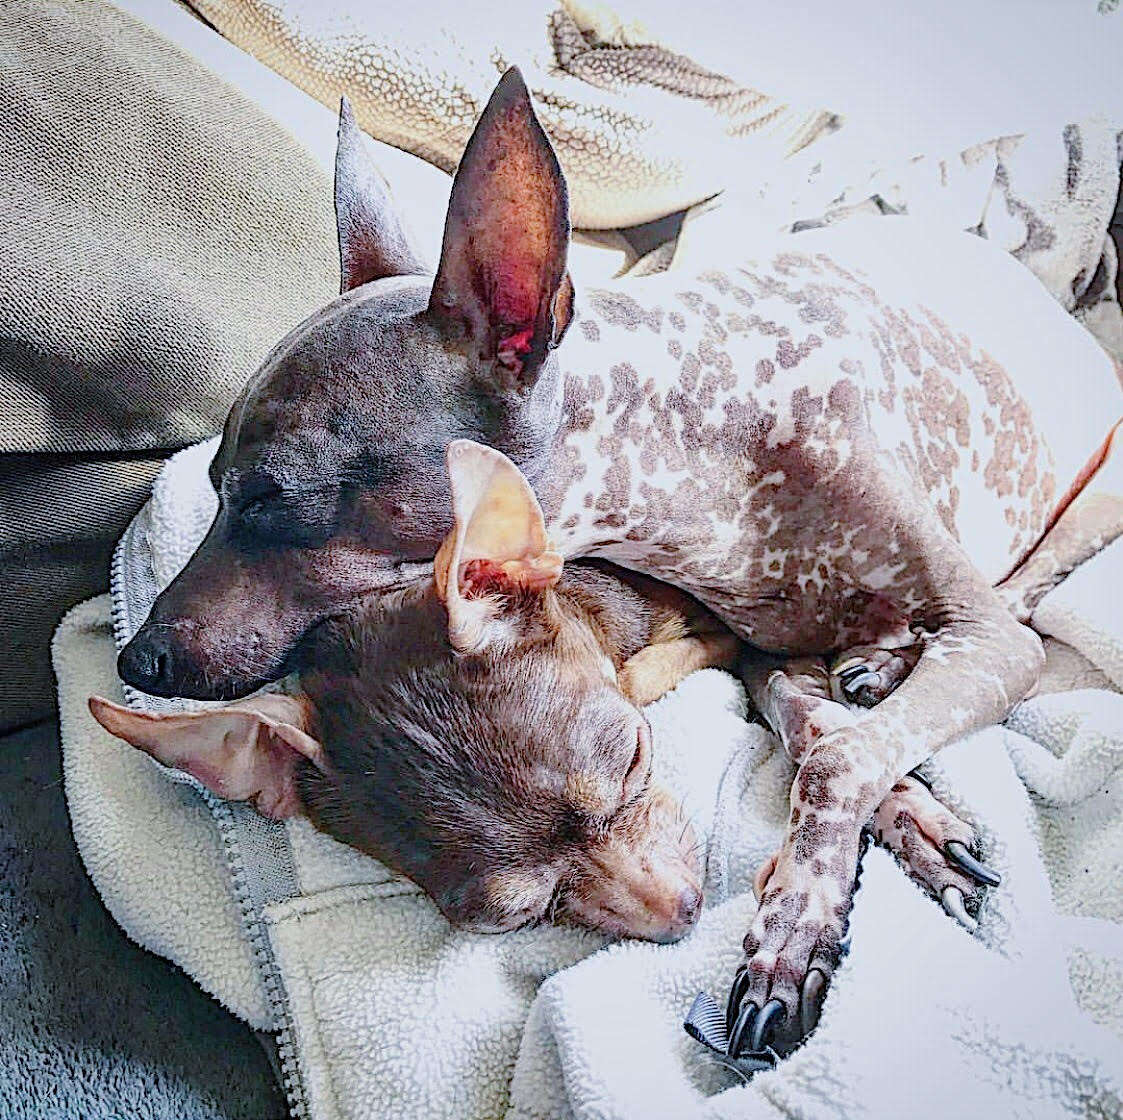 Dogs snuggling on bed